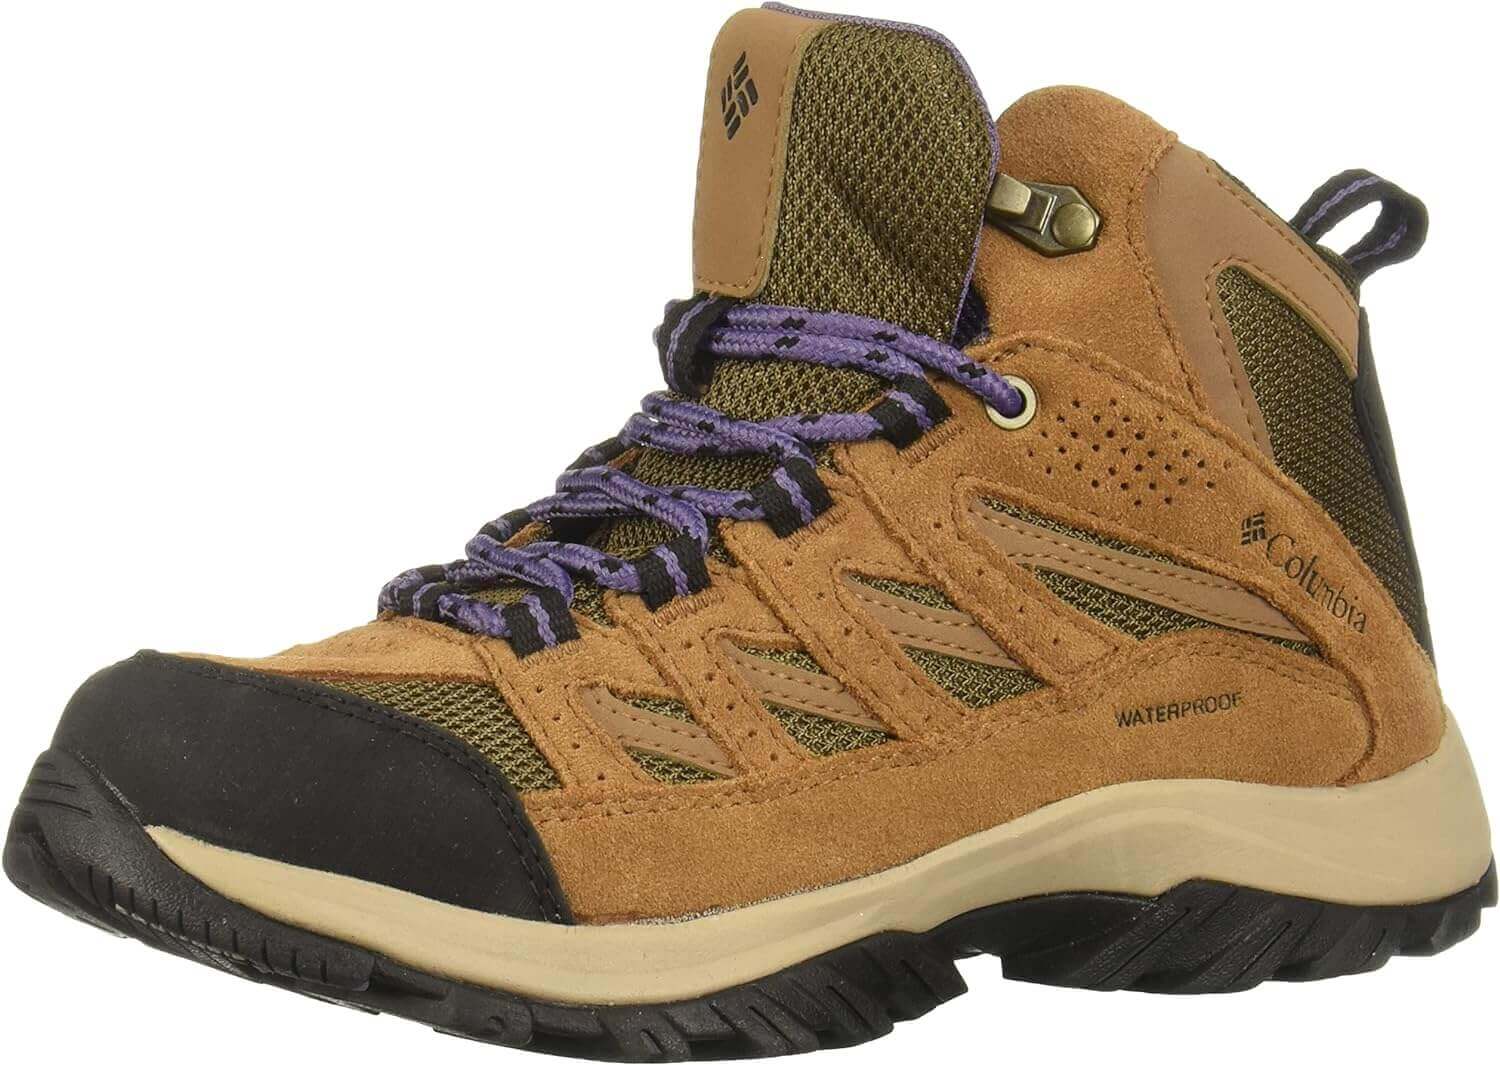 Shop The Latest >Columbia Women's Crestwood Mid Waterproof Hiking Boot > *Only $110.09*> From The Top Brand > *Columbial* > Shop Now and Get Free Shipping On Orders Over $45.00 >*Shop Earth Foot*